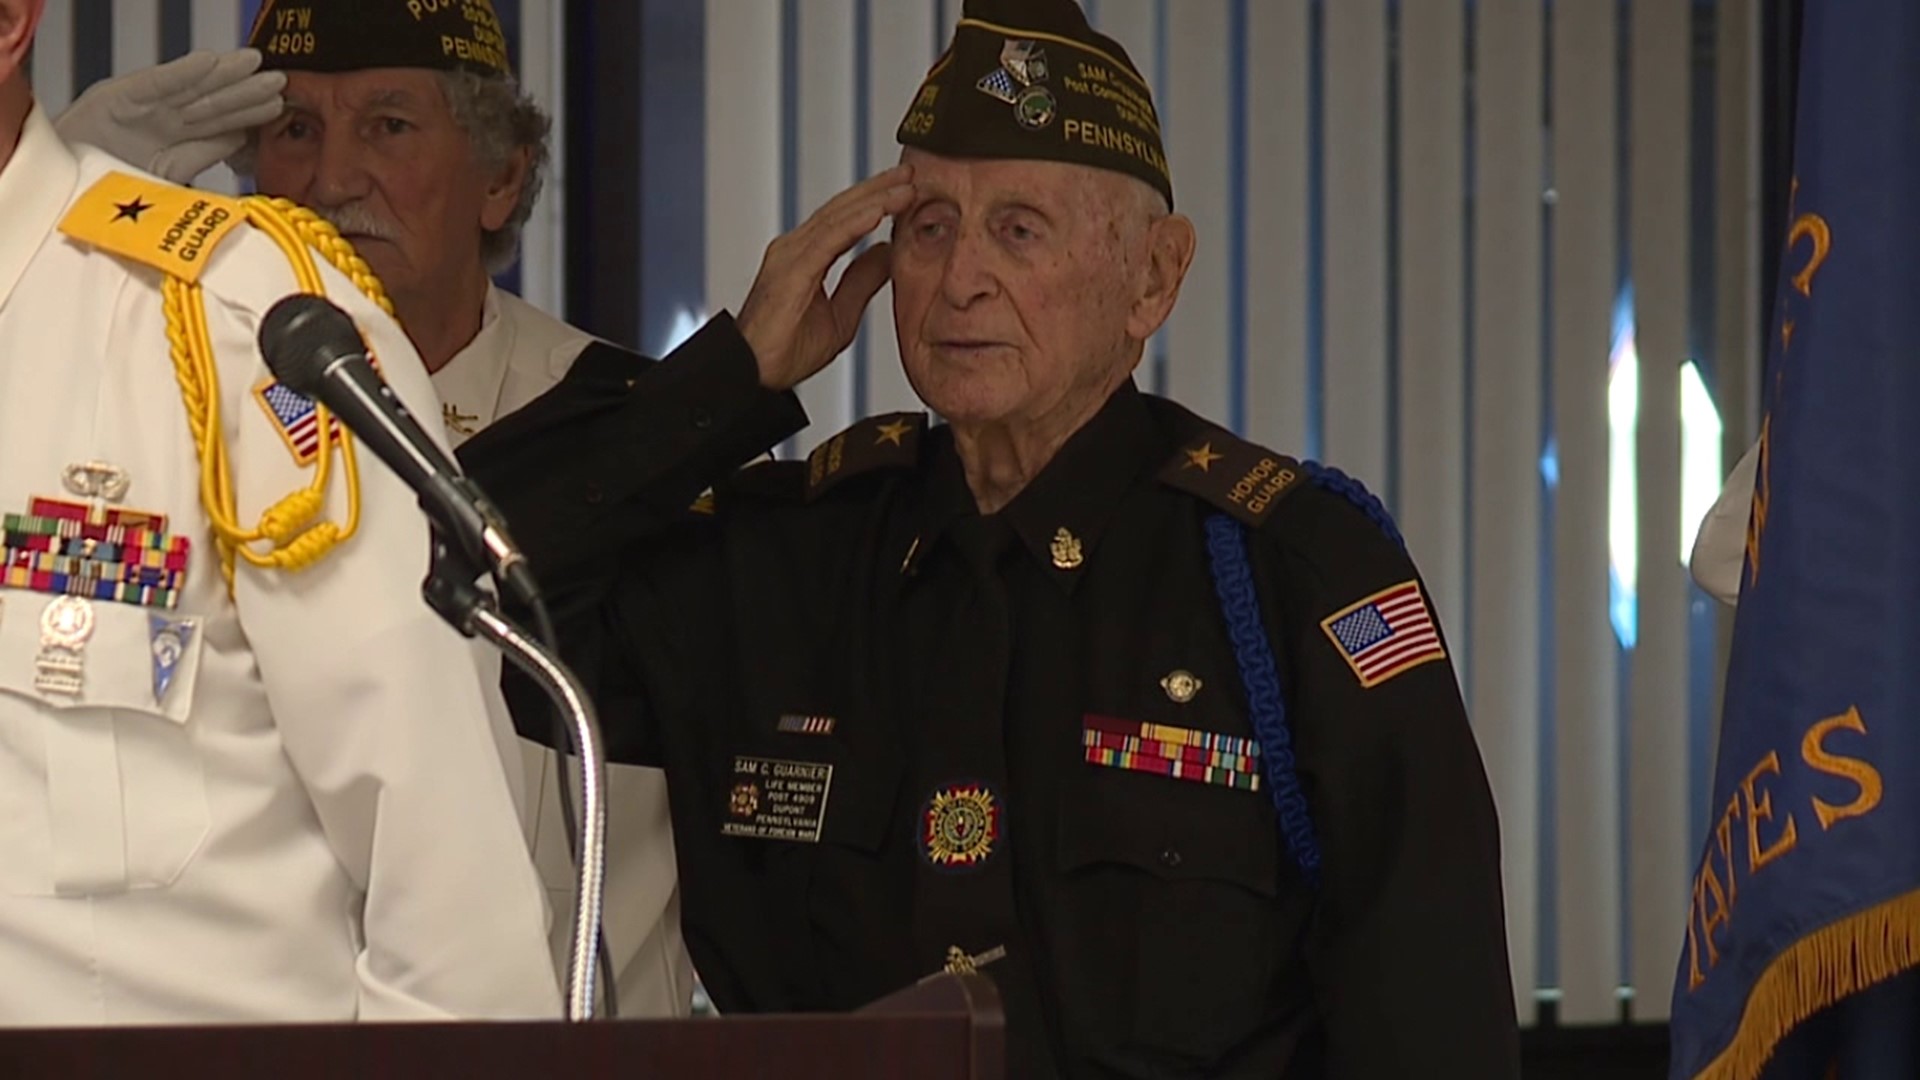 Newswatch 16's Emily Kress introduces us to a World War II veteran from Luzerne County who continues to serve his country at the age of 97.